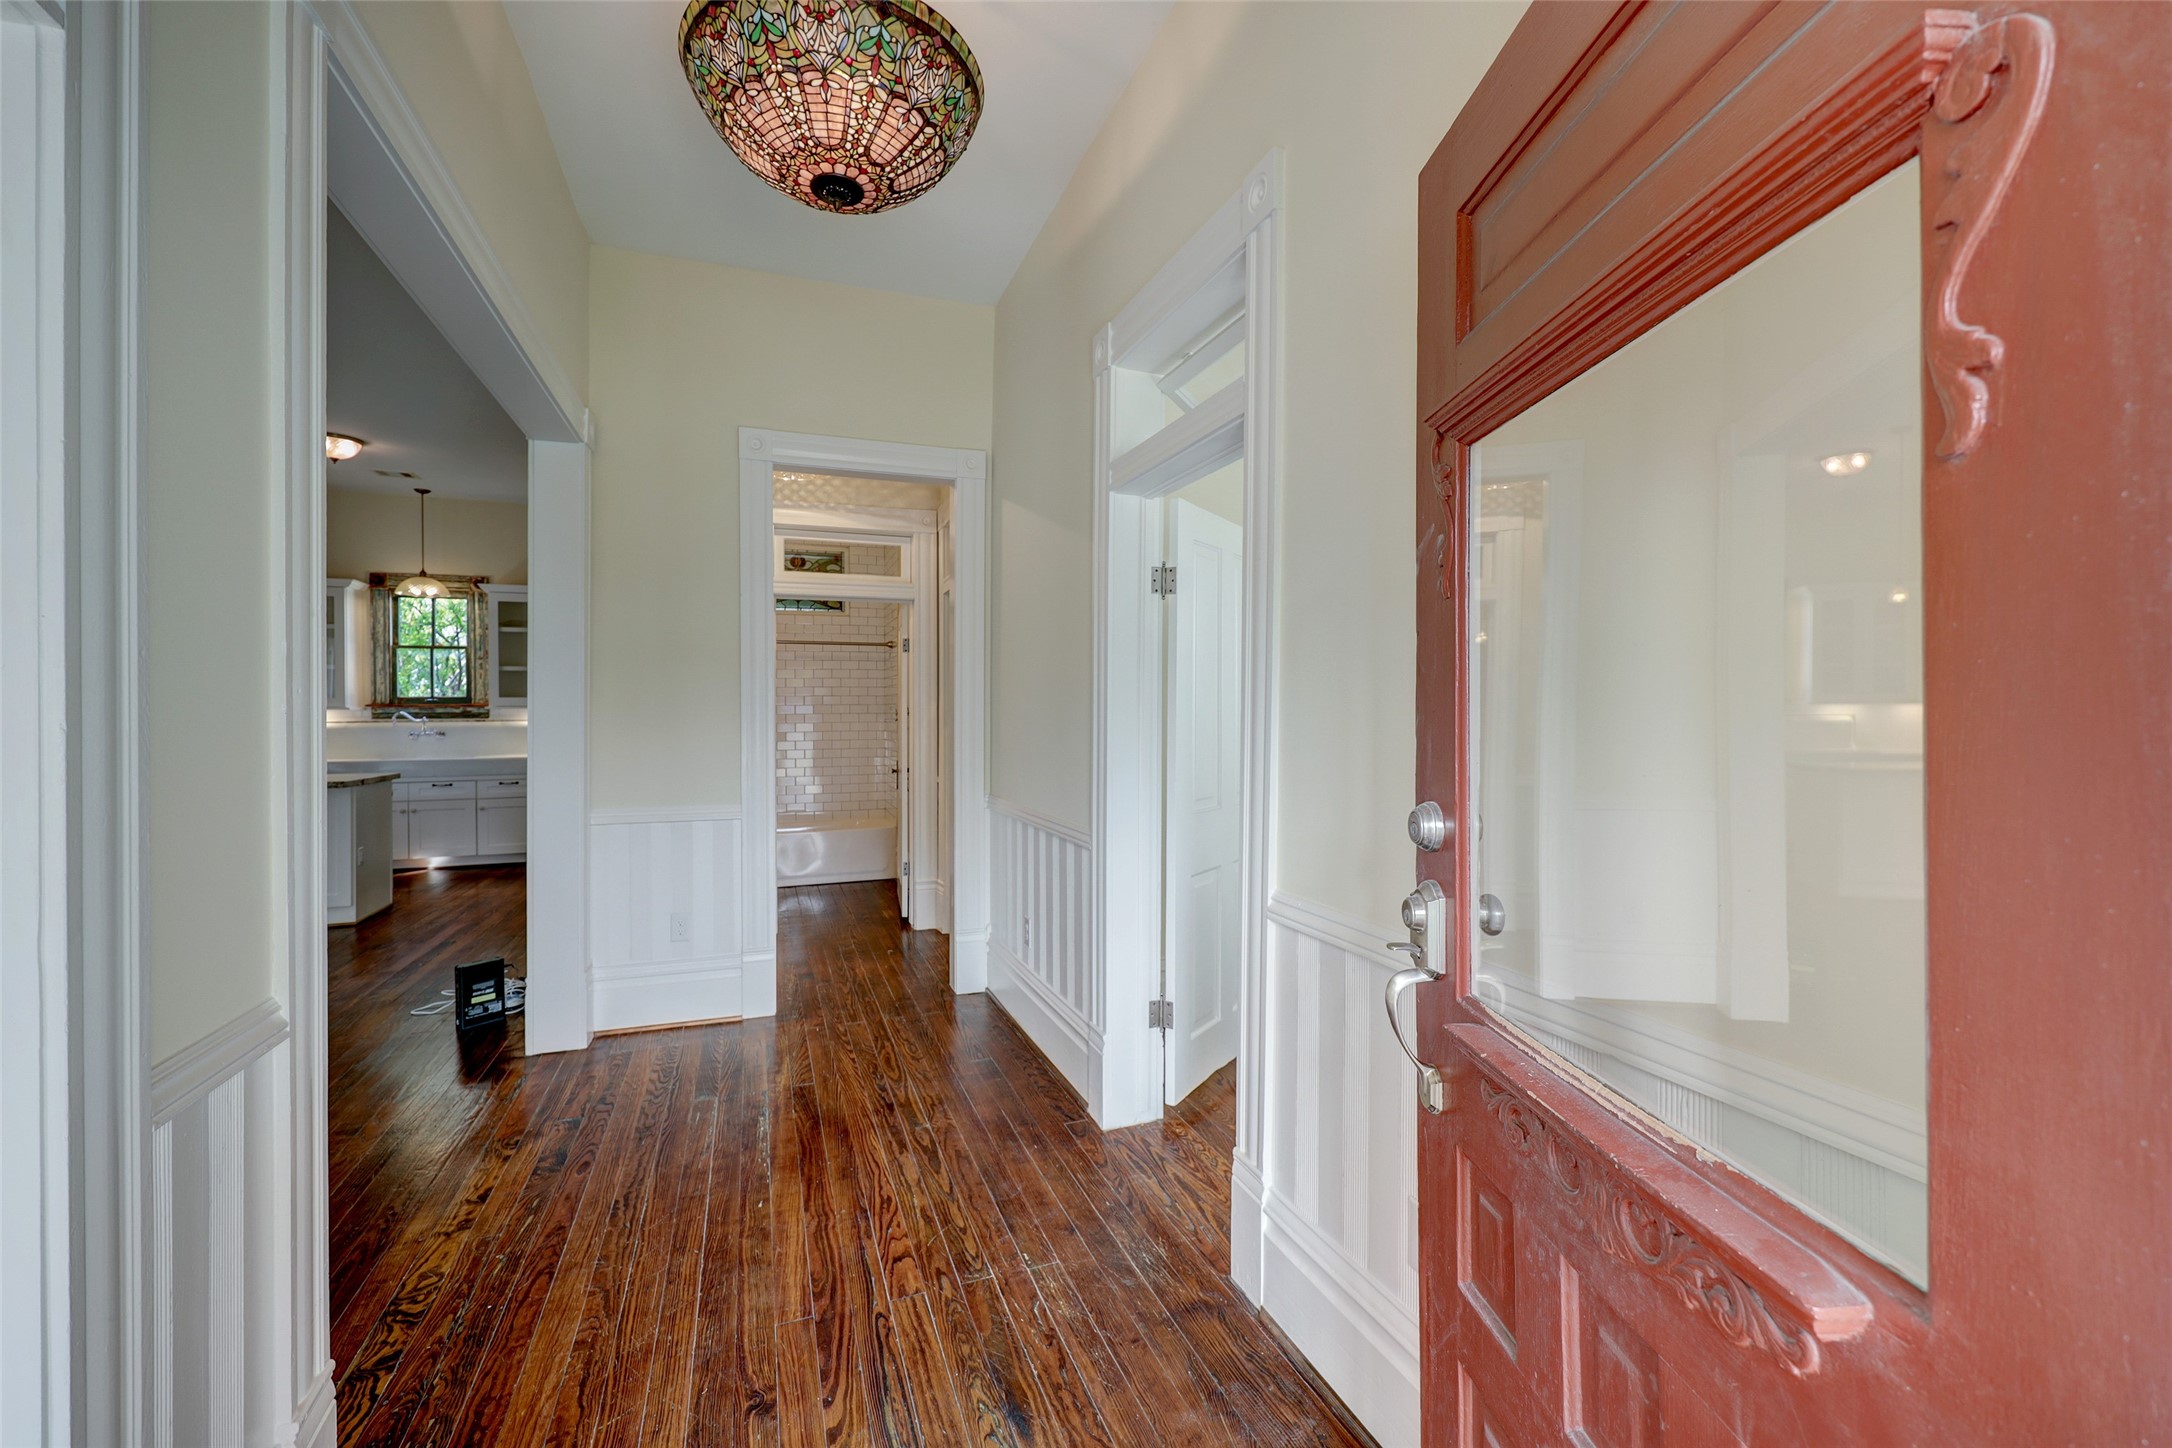 Front Entryway - Twelve foot ceilings through-out home